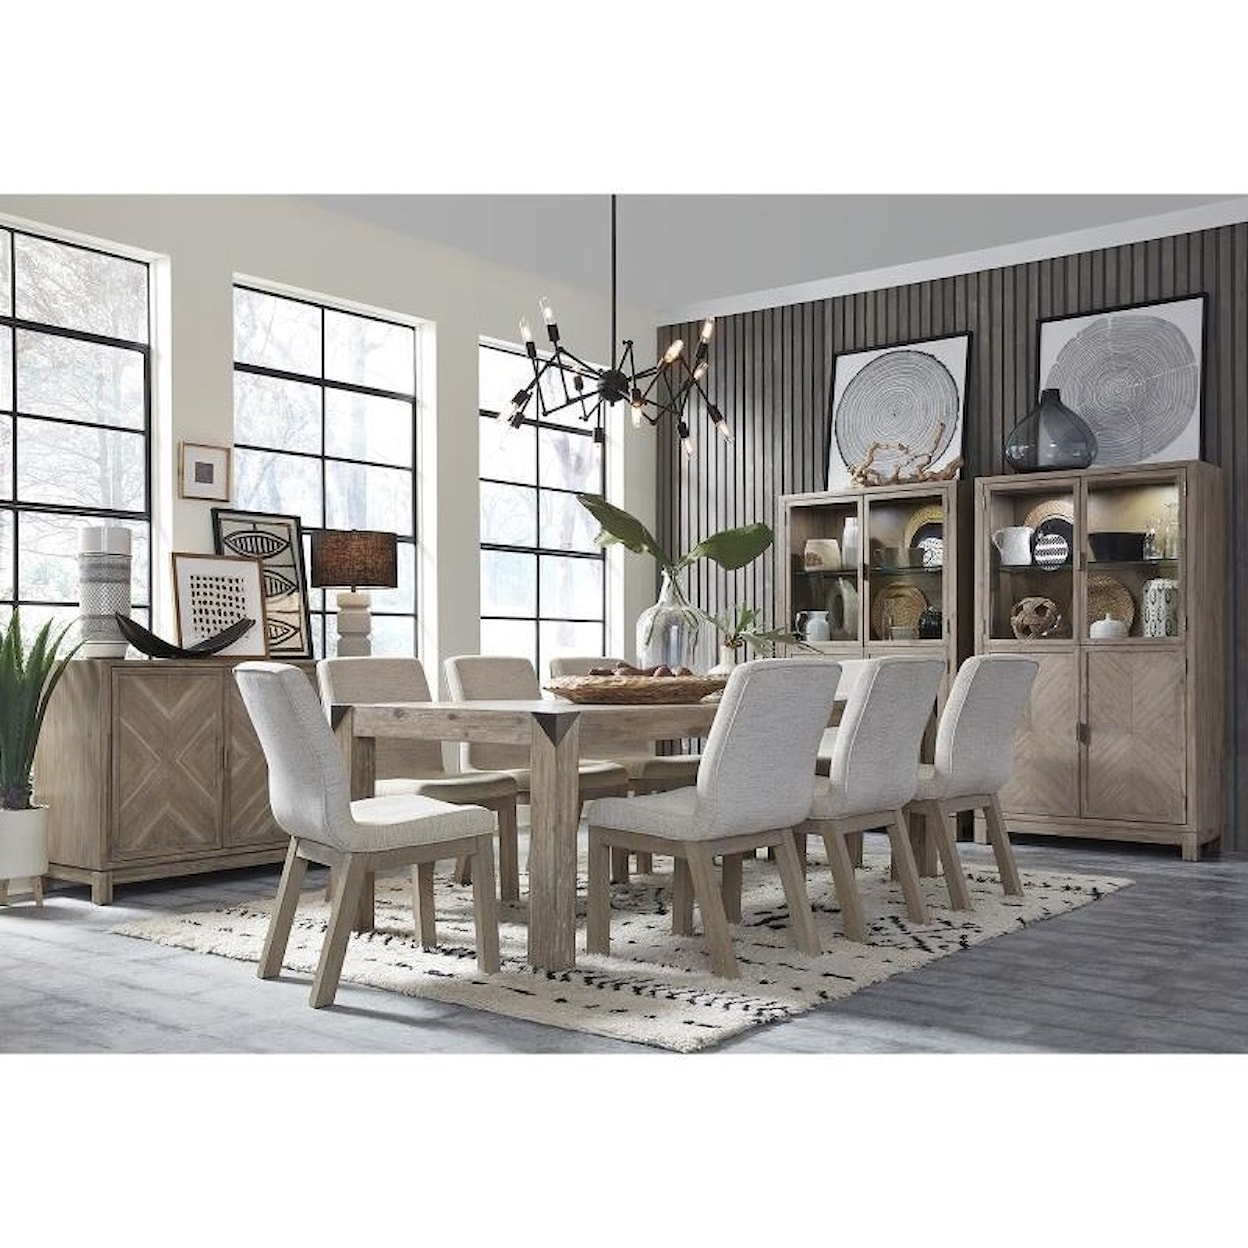 Magnussen Home Ainsley Dining Upholstered Side Chair